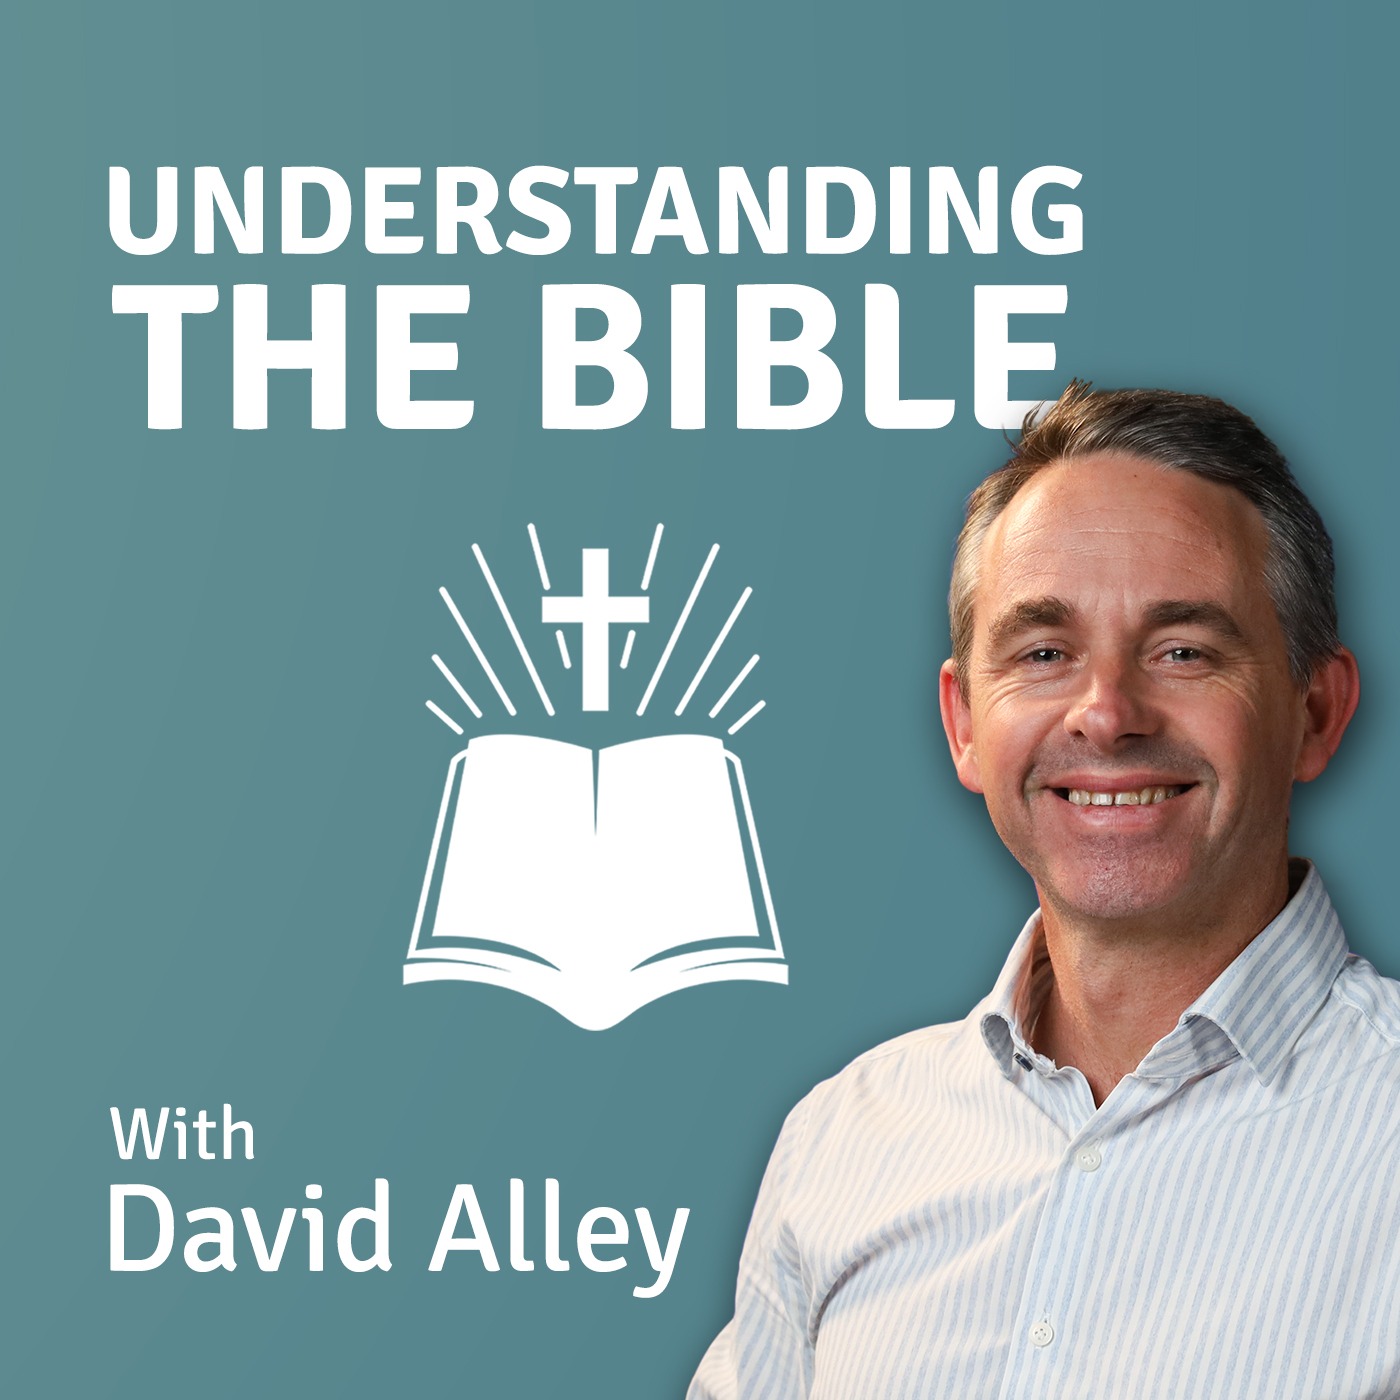 The Bible by David Alley